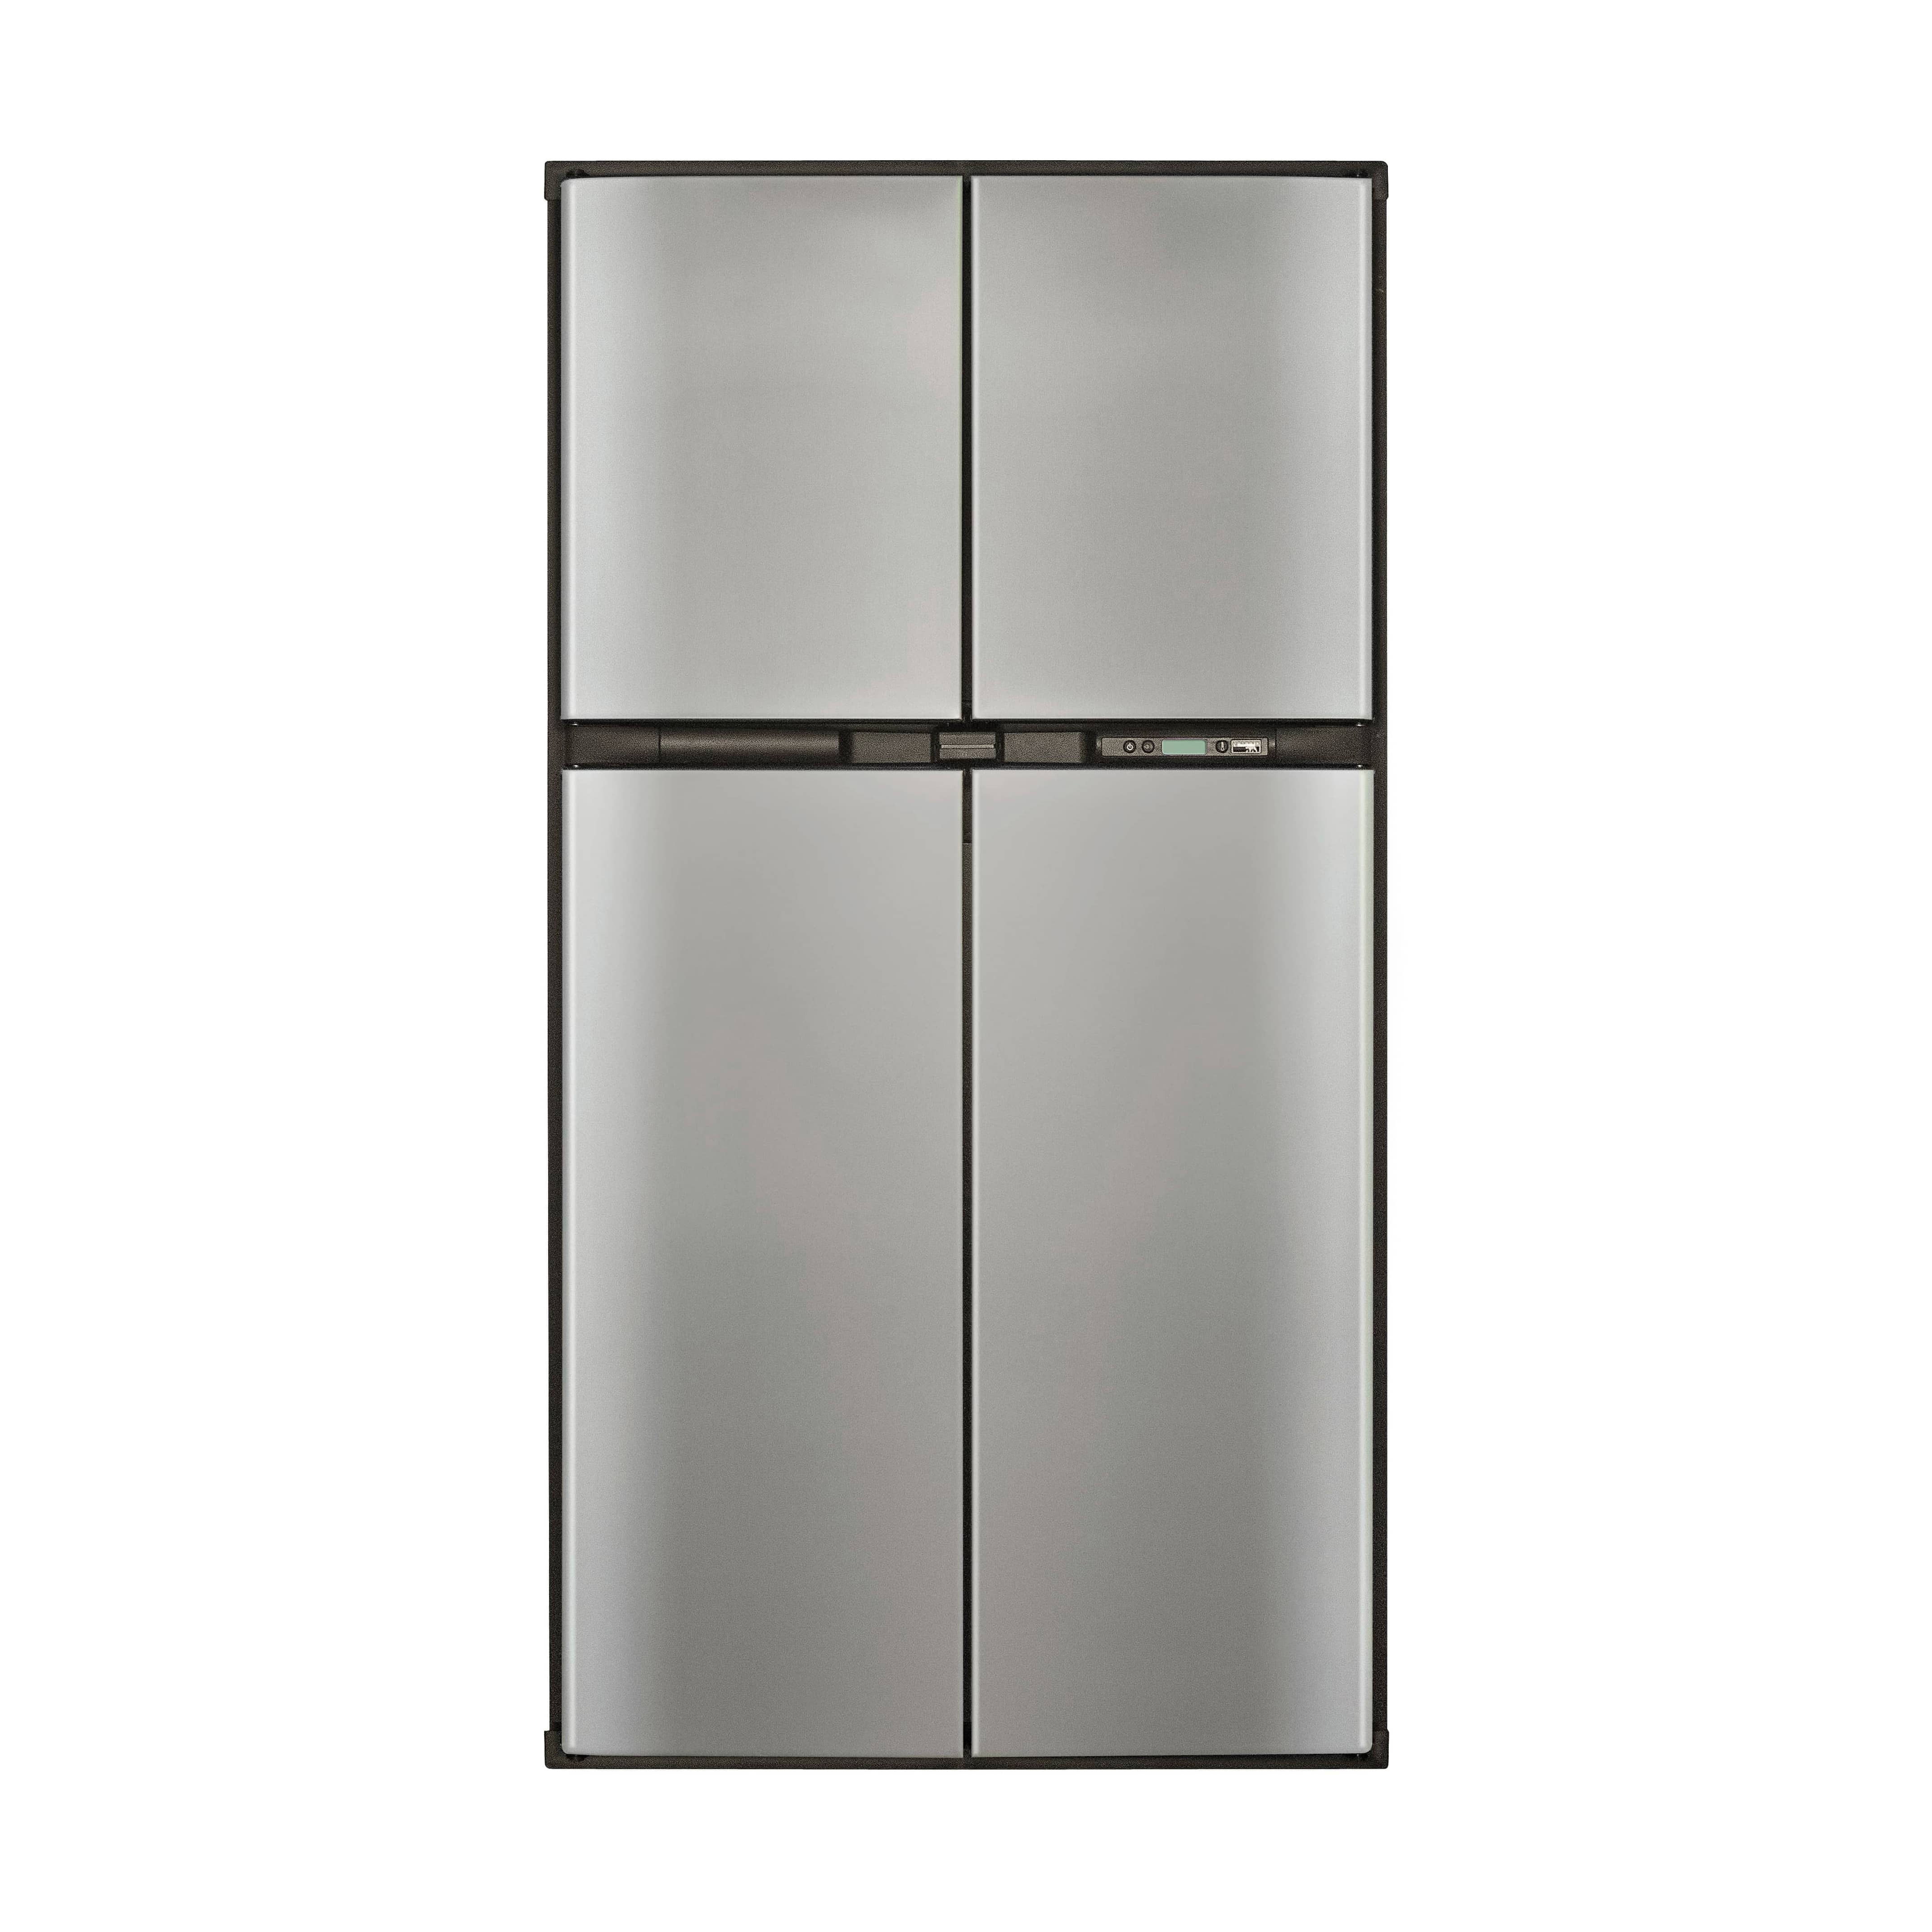 https://norcold.com/wp-content/uploads/2018/06/Norcold-2118-rv-refrigerator-front-min.jpg